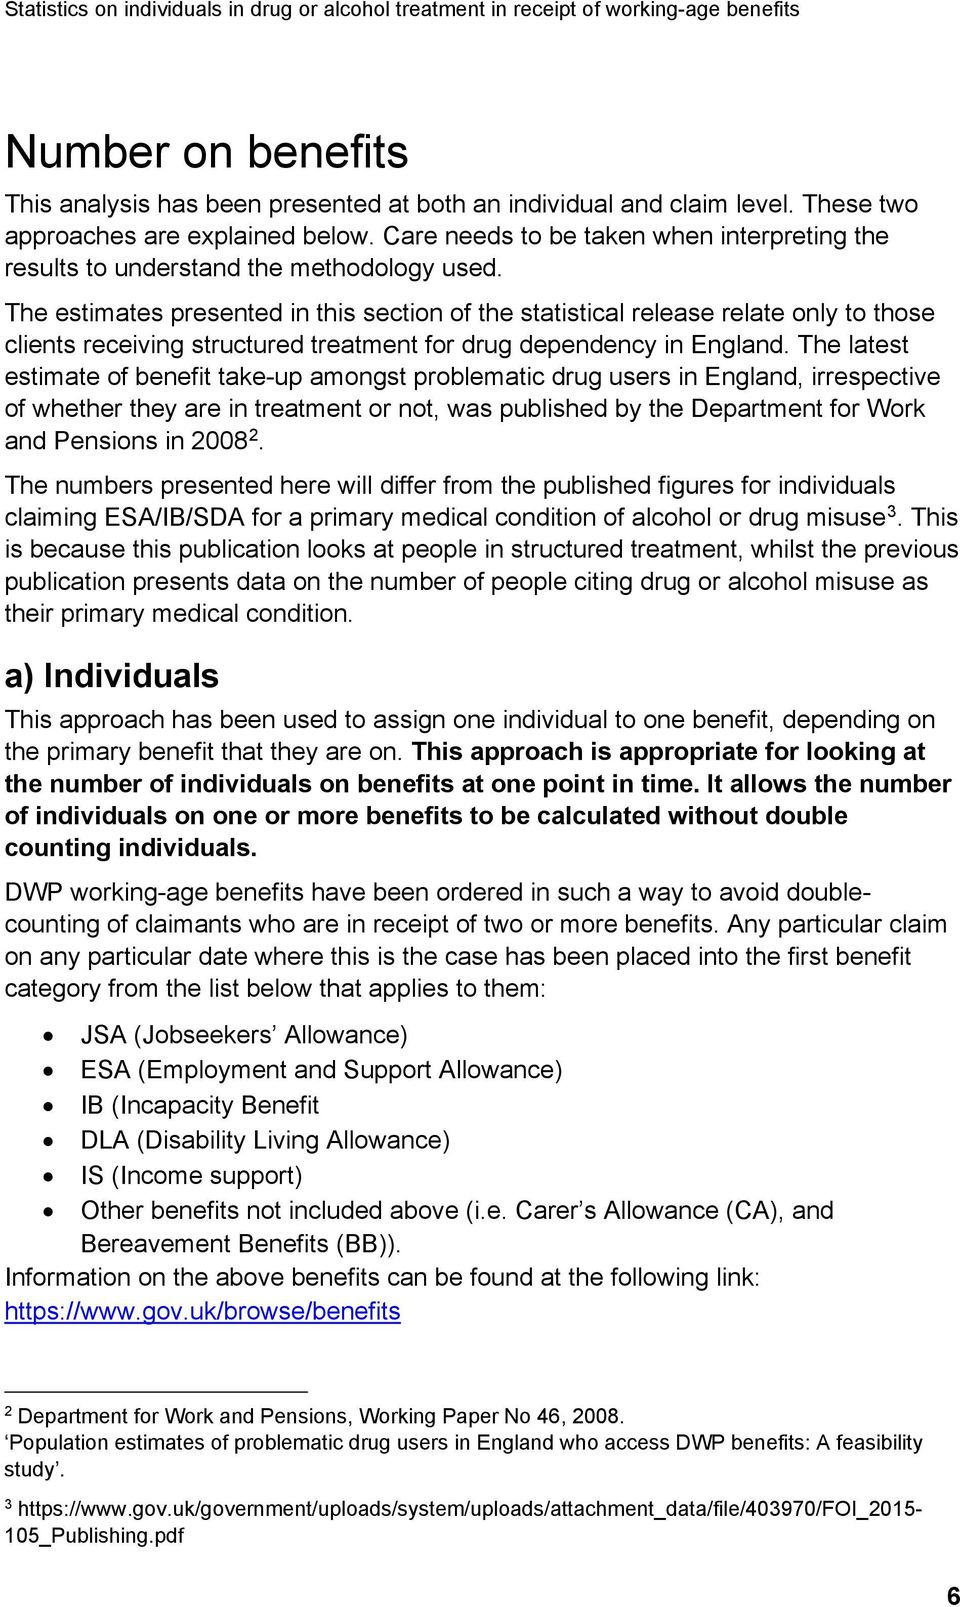 The estimates presented in this section of the statistical release relate only to those clients receiving structured treatment for drug dependency in England.